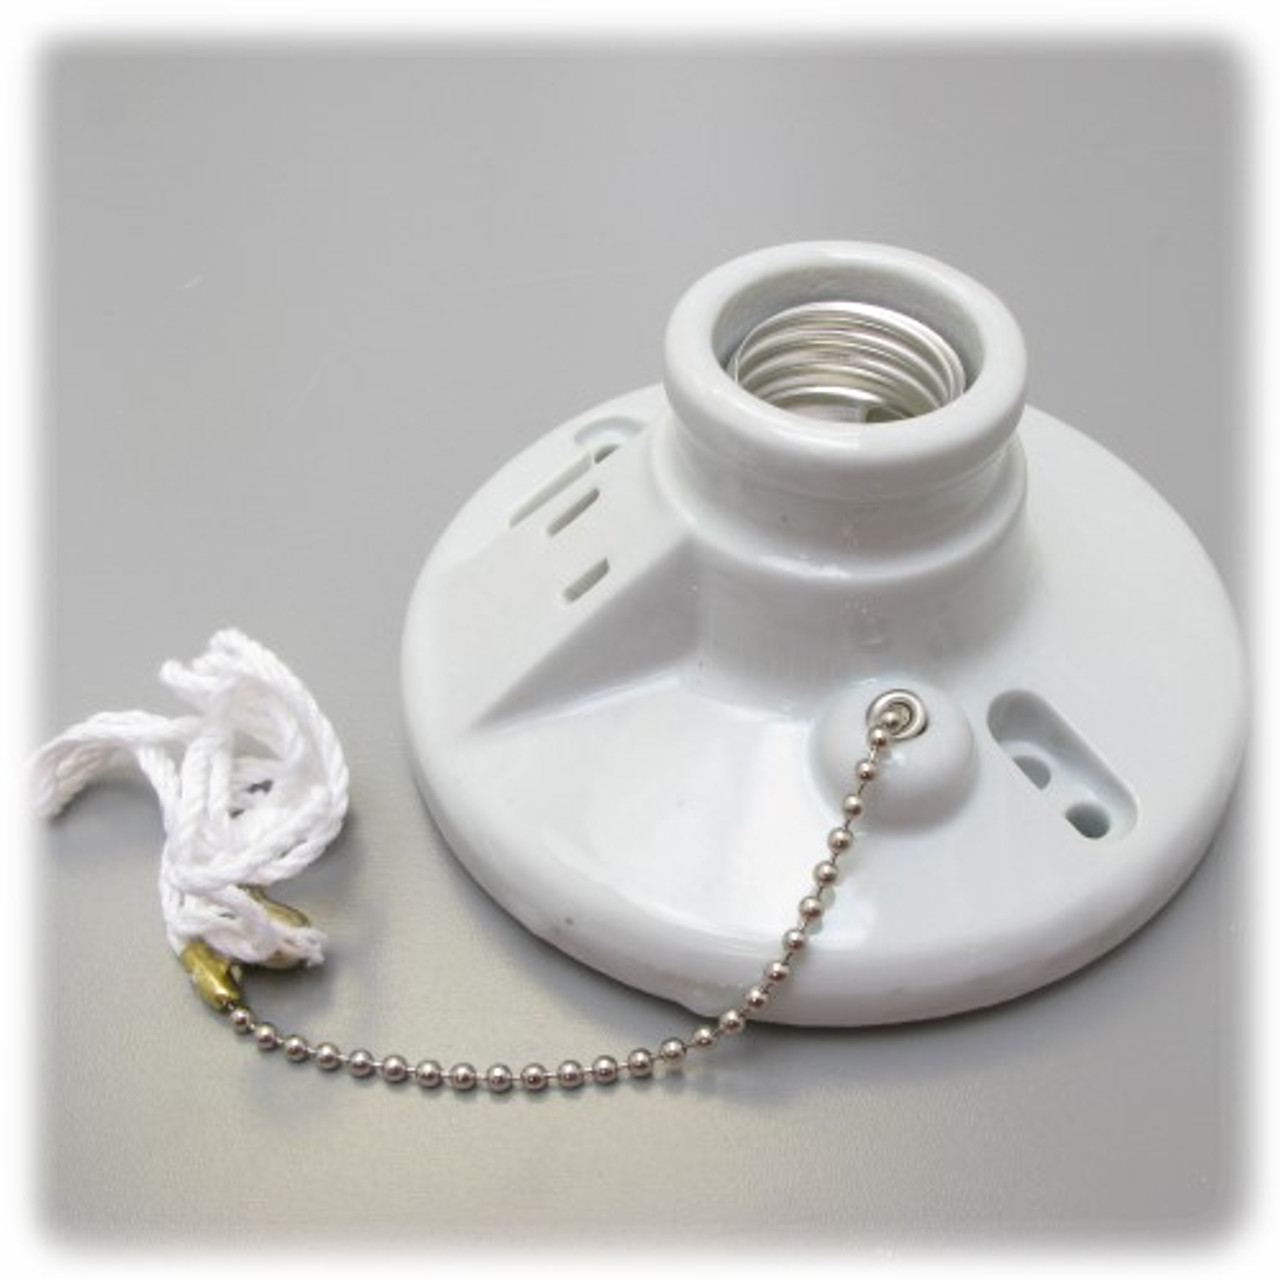 Lamp Holder, Porcelain with Pull Chain and Outlet